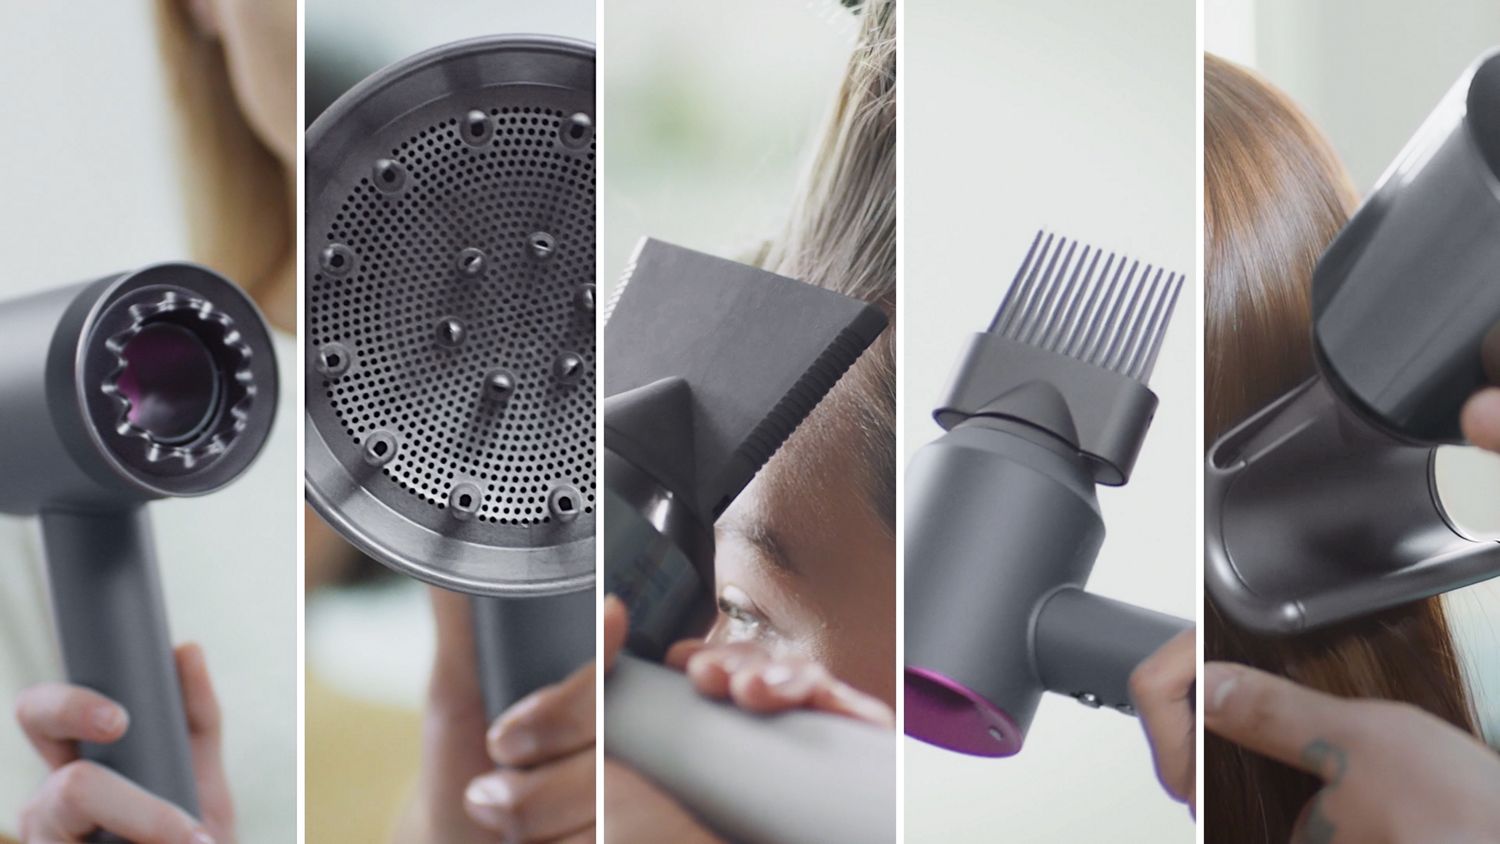 Dyson Supersonic™ professional hair dryer